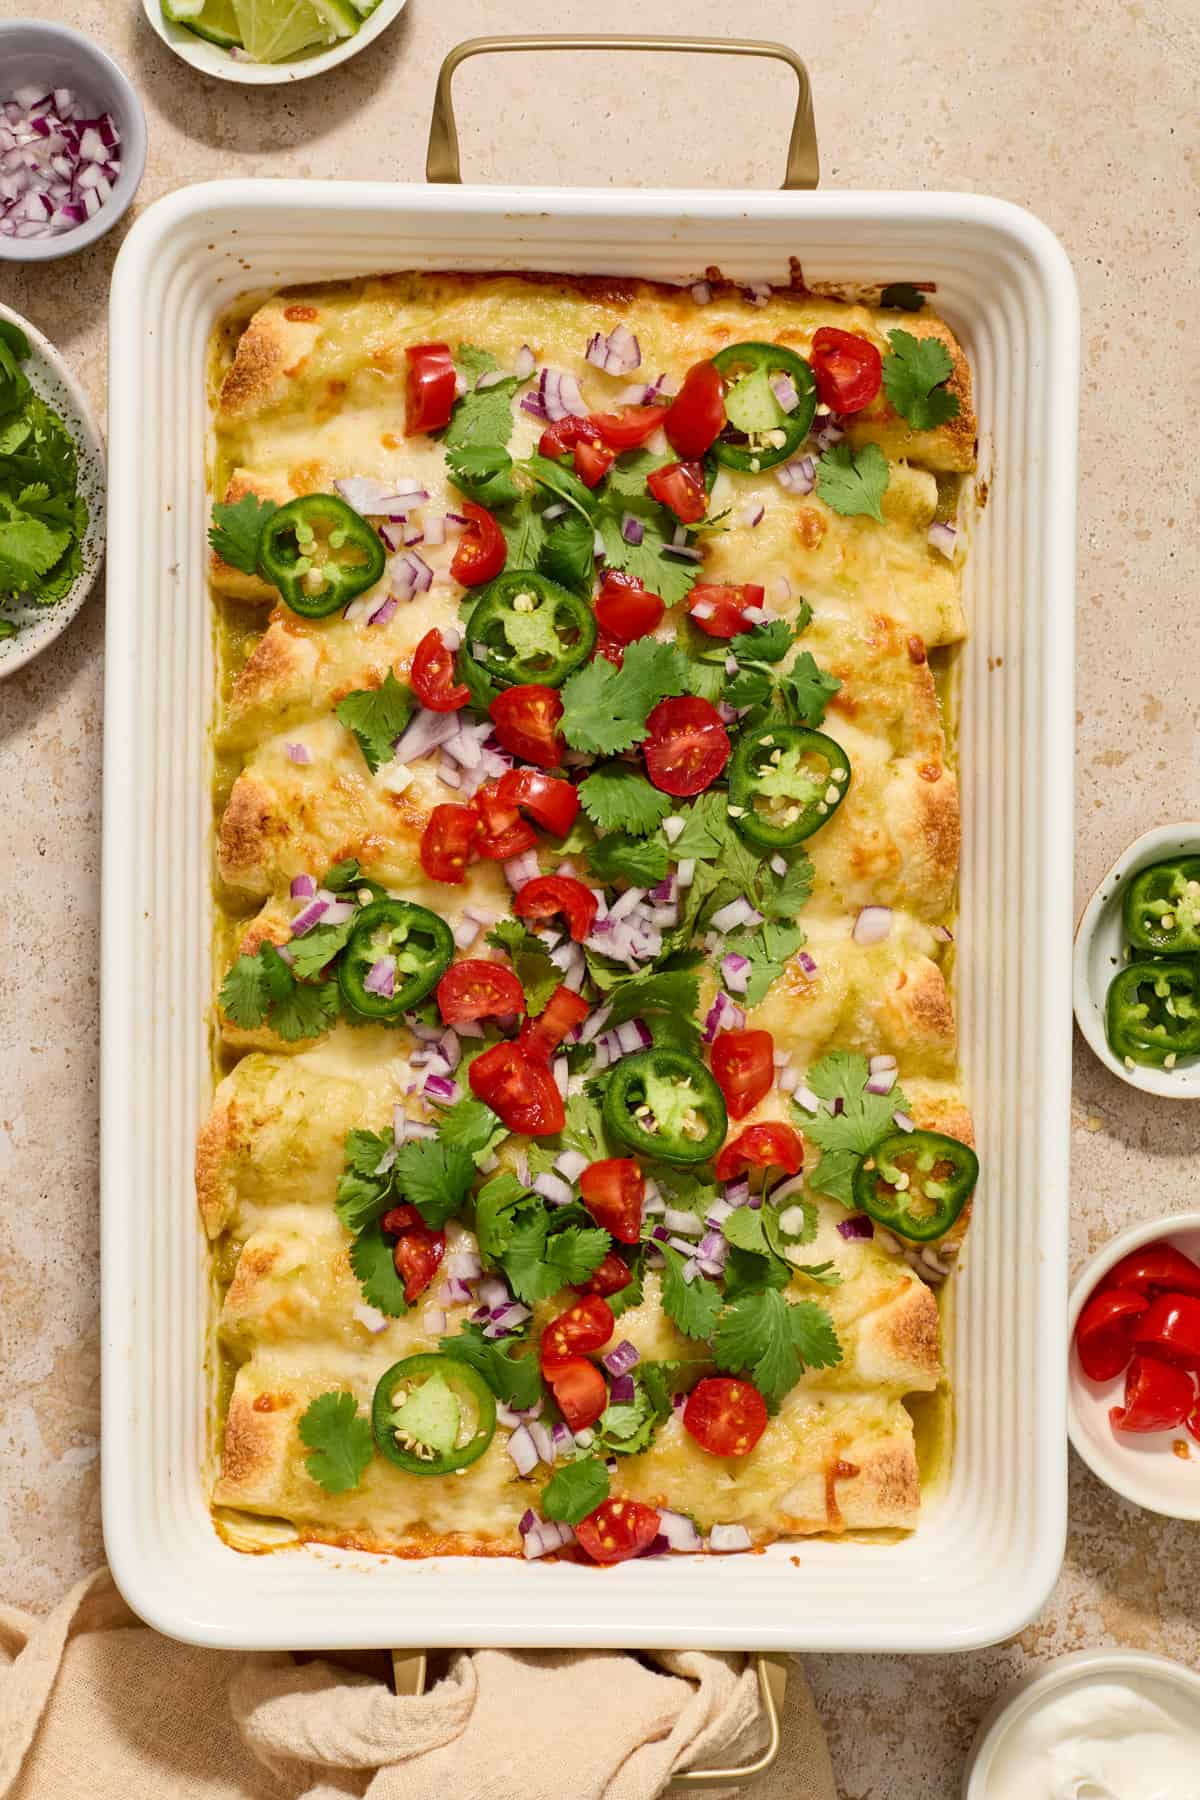 Pan with chicken enchiladas in green sauce with melted cheese and chopped cilantro on top.